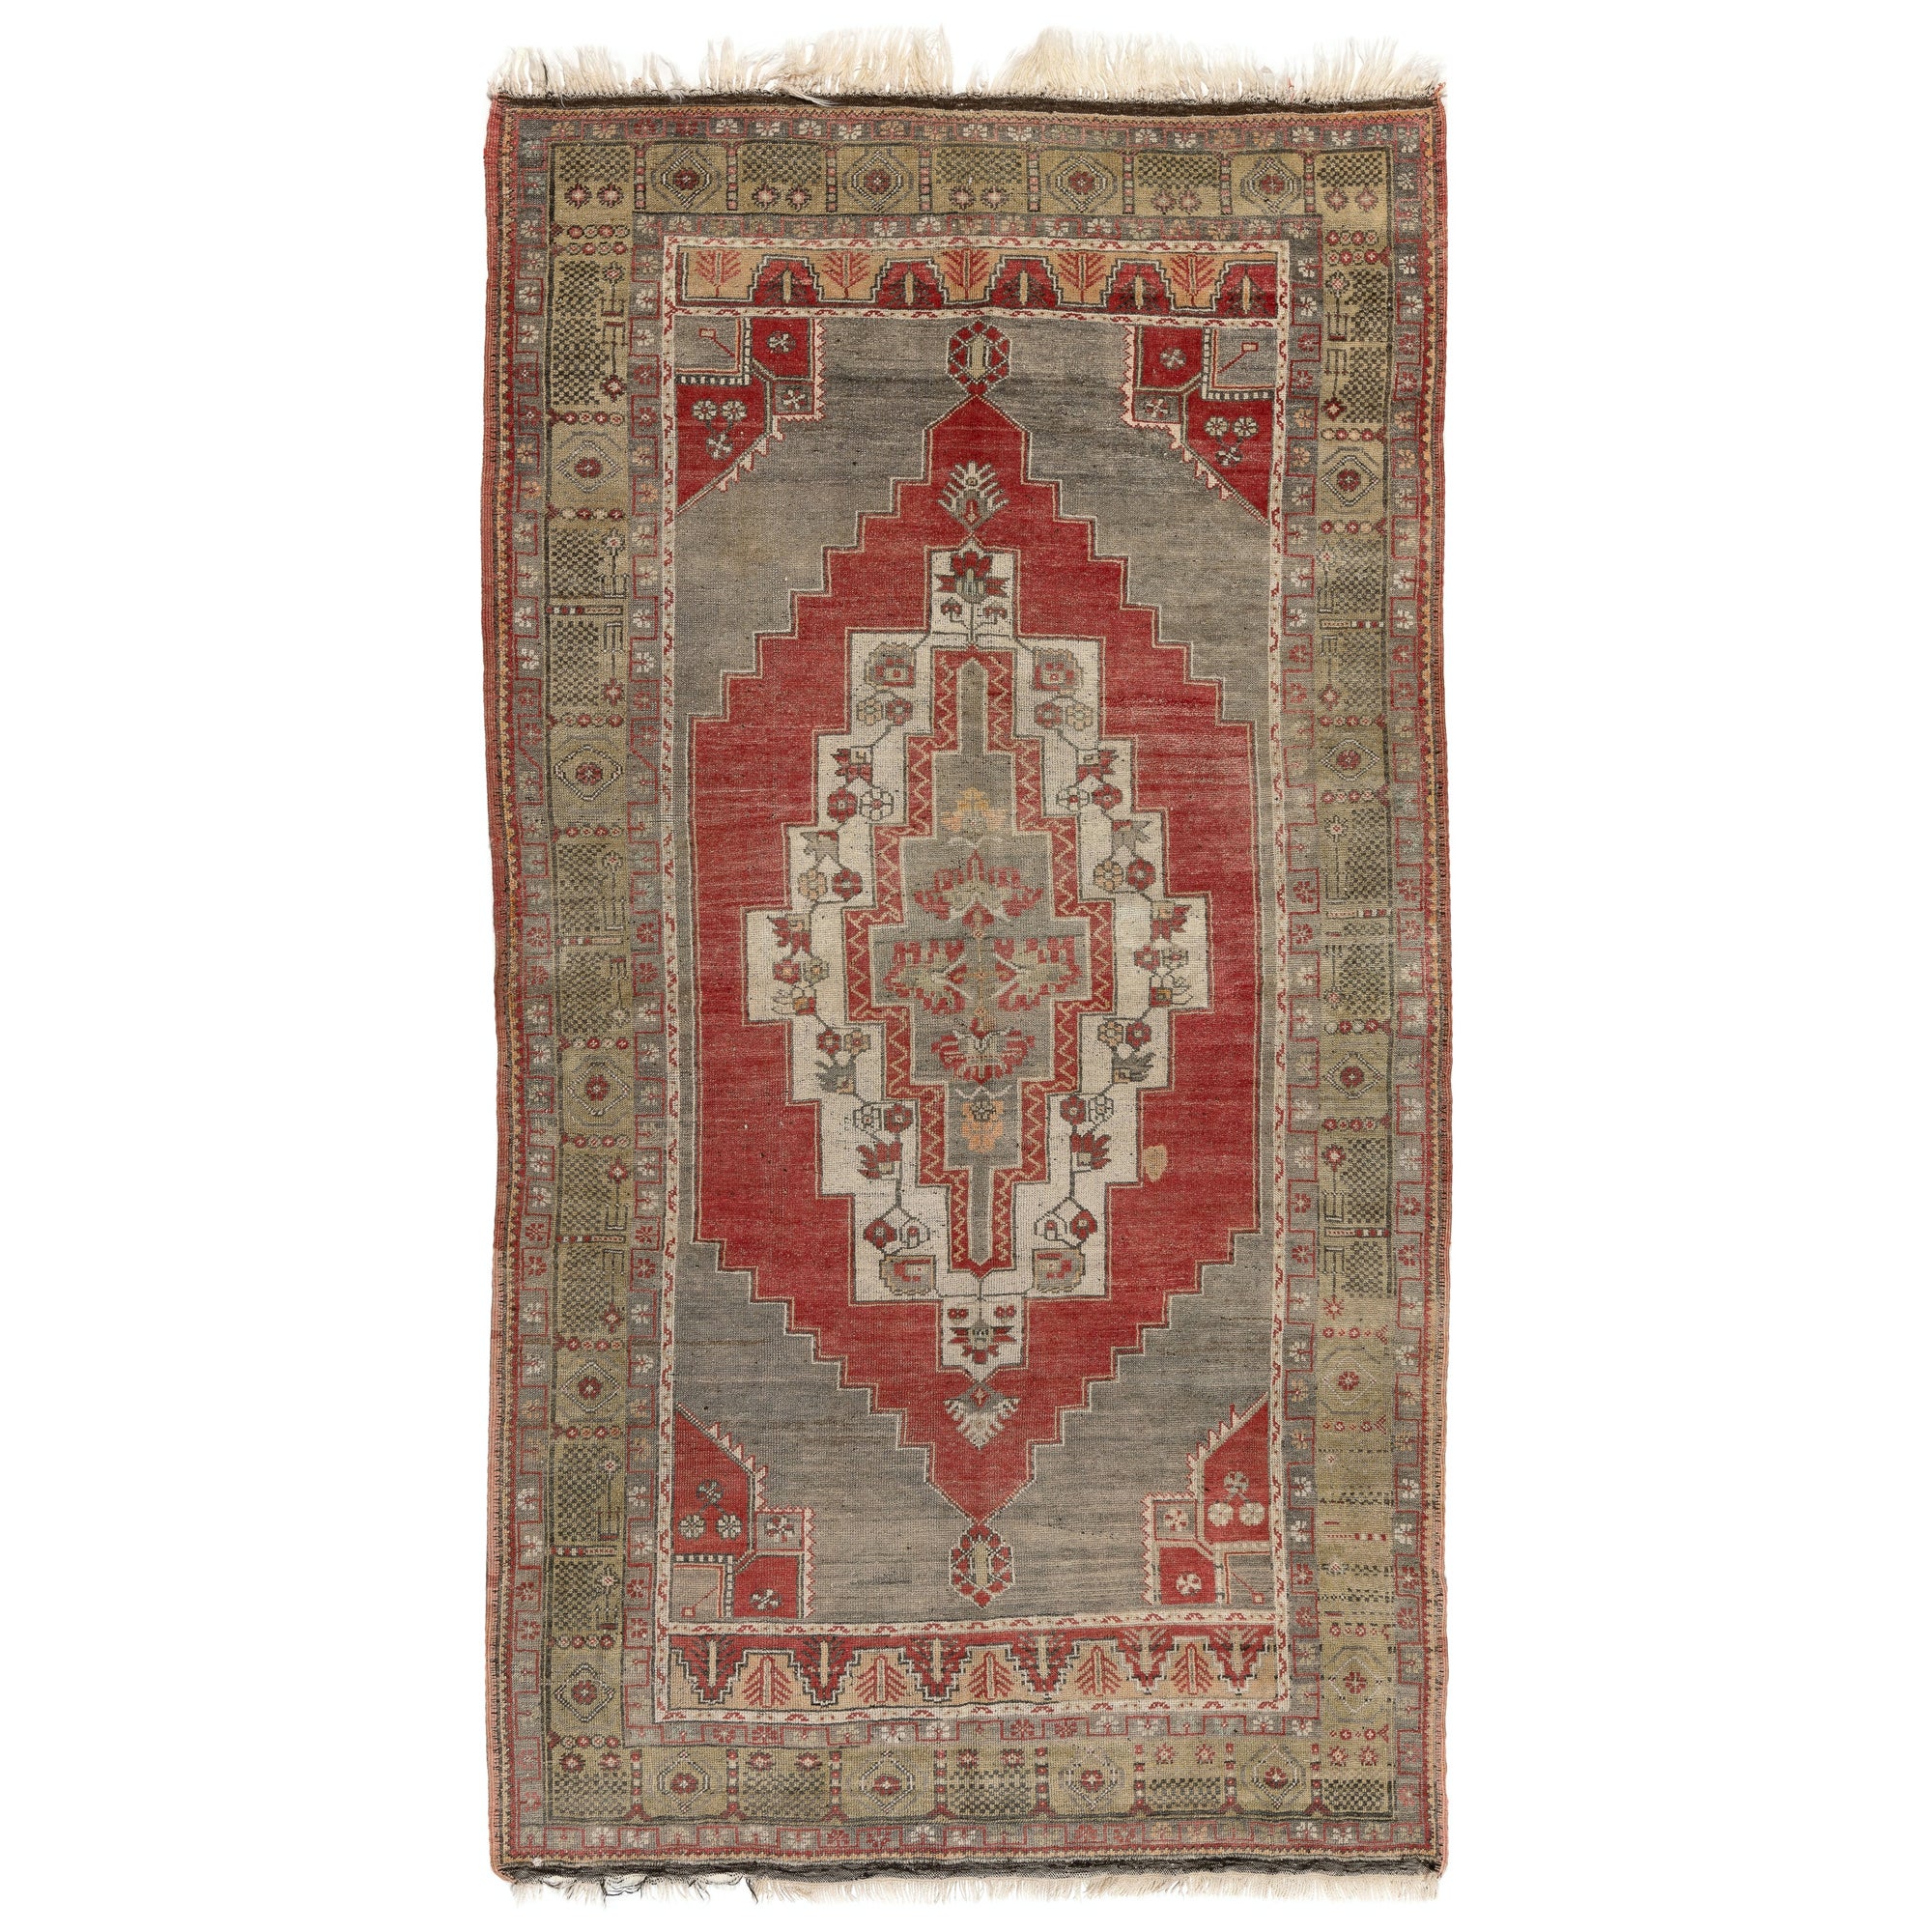 5.3x9.4 Ft Hand Knotted Vintage Anatolian Area Rug with Tribal Style. 100% Wool